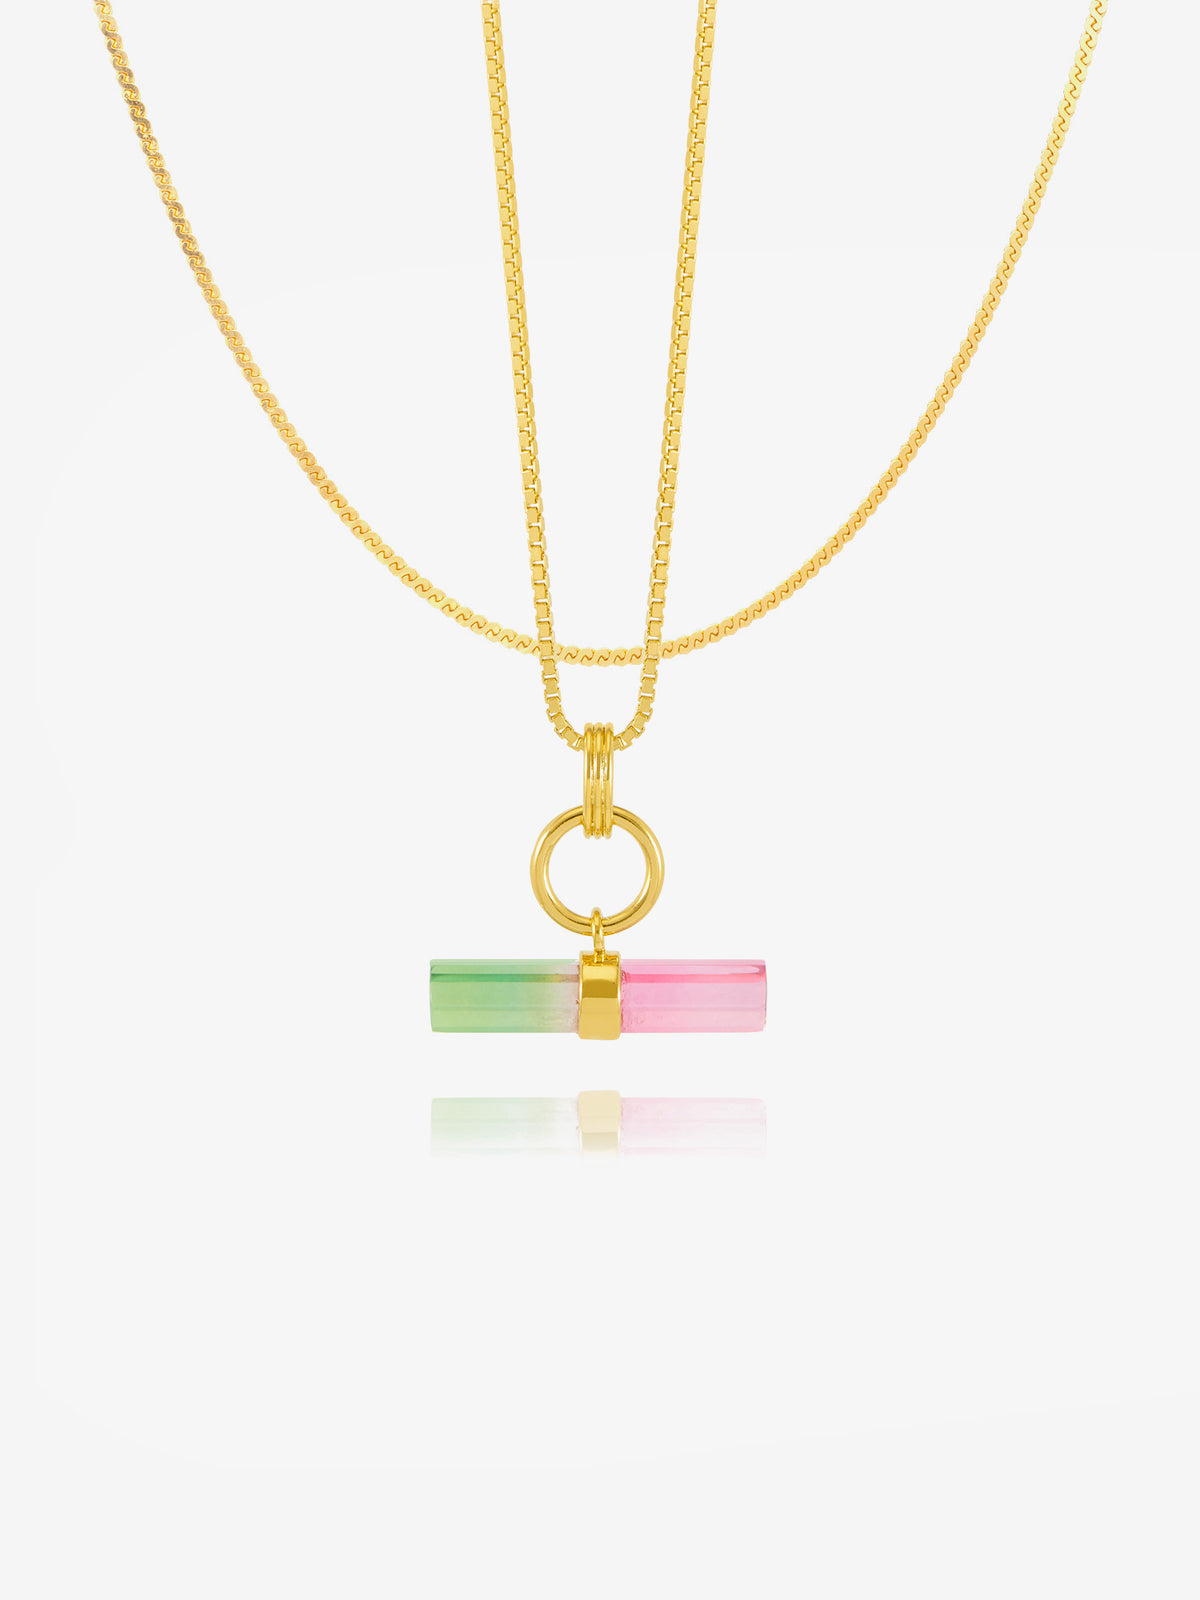 Styled Watermelon T-bar Necklace and Serpentine Chain Layered Necklace Set